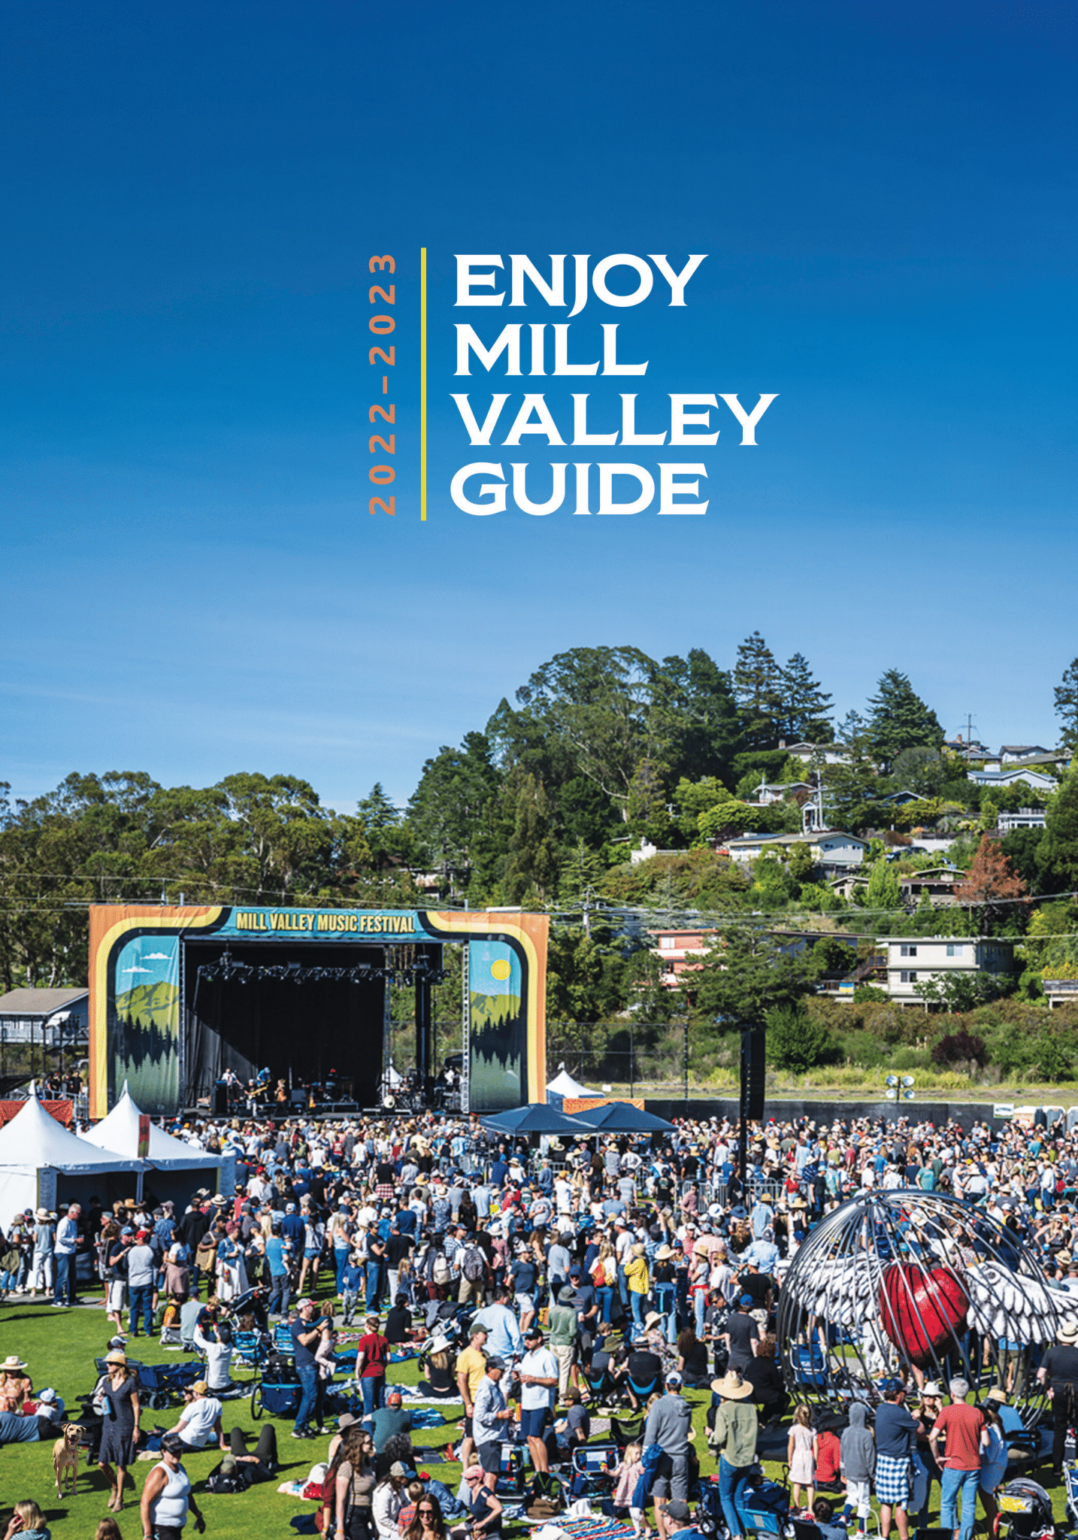 Enjoy Mill Valley Guide